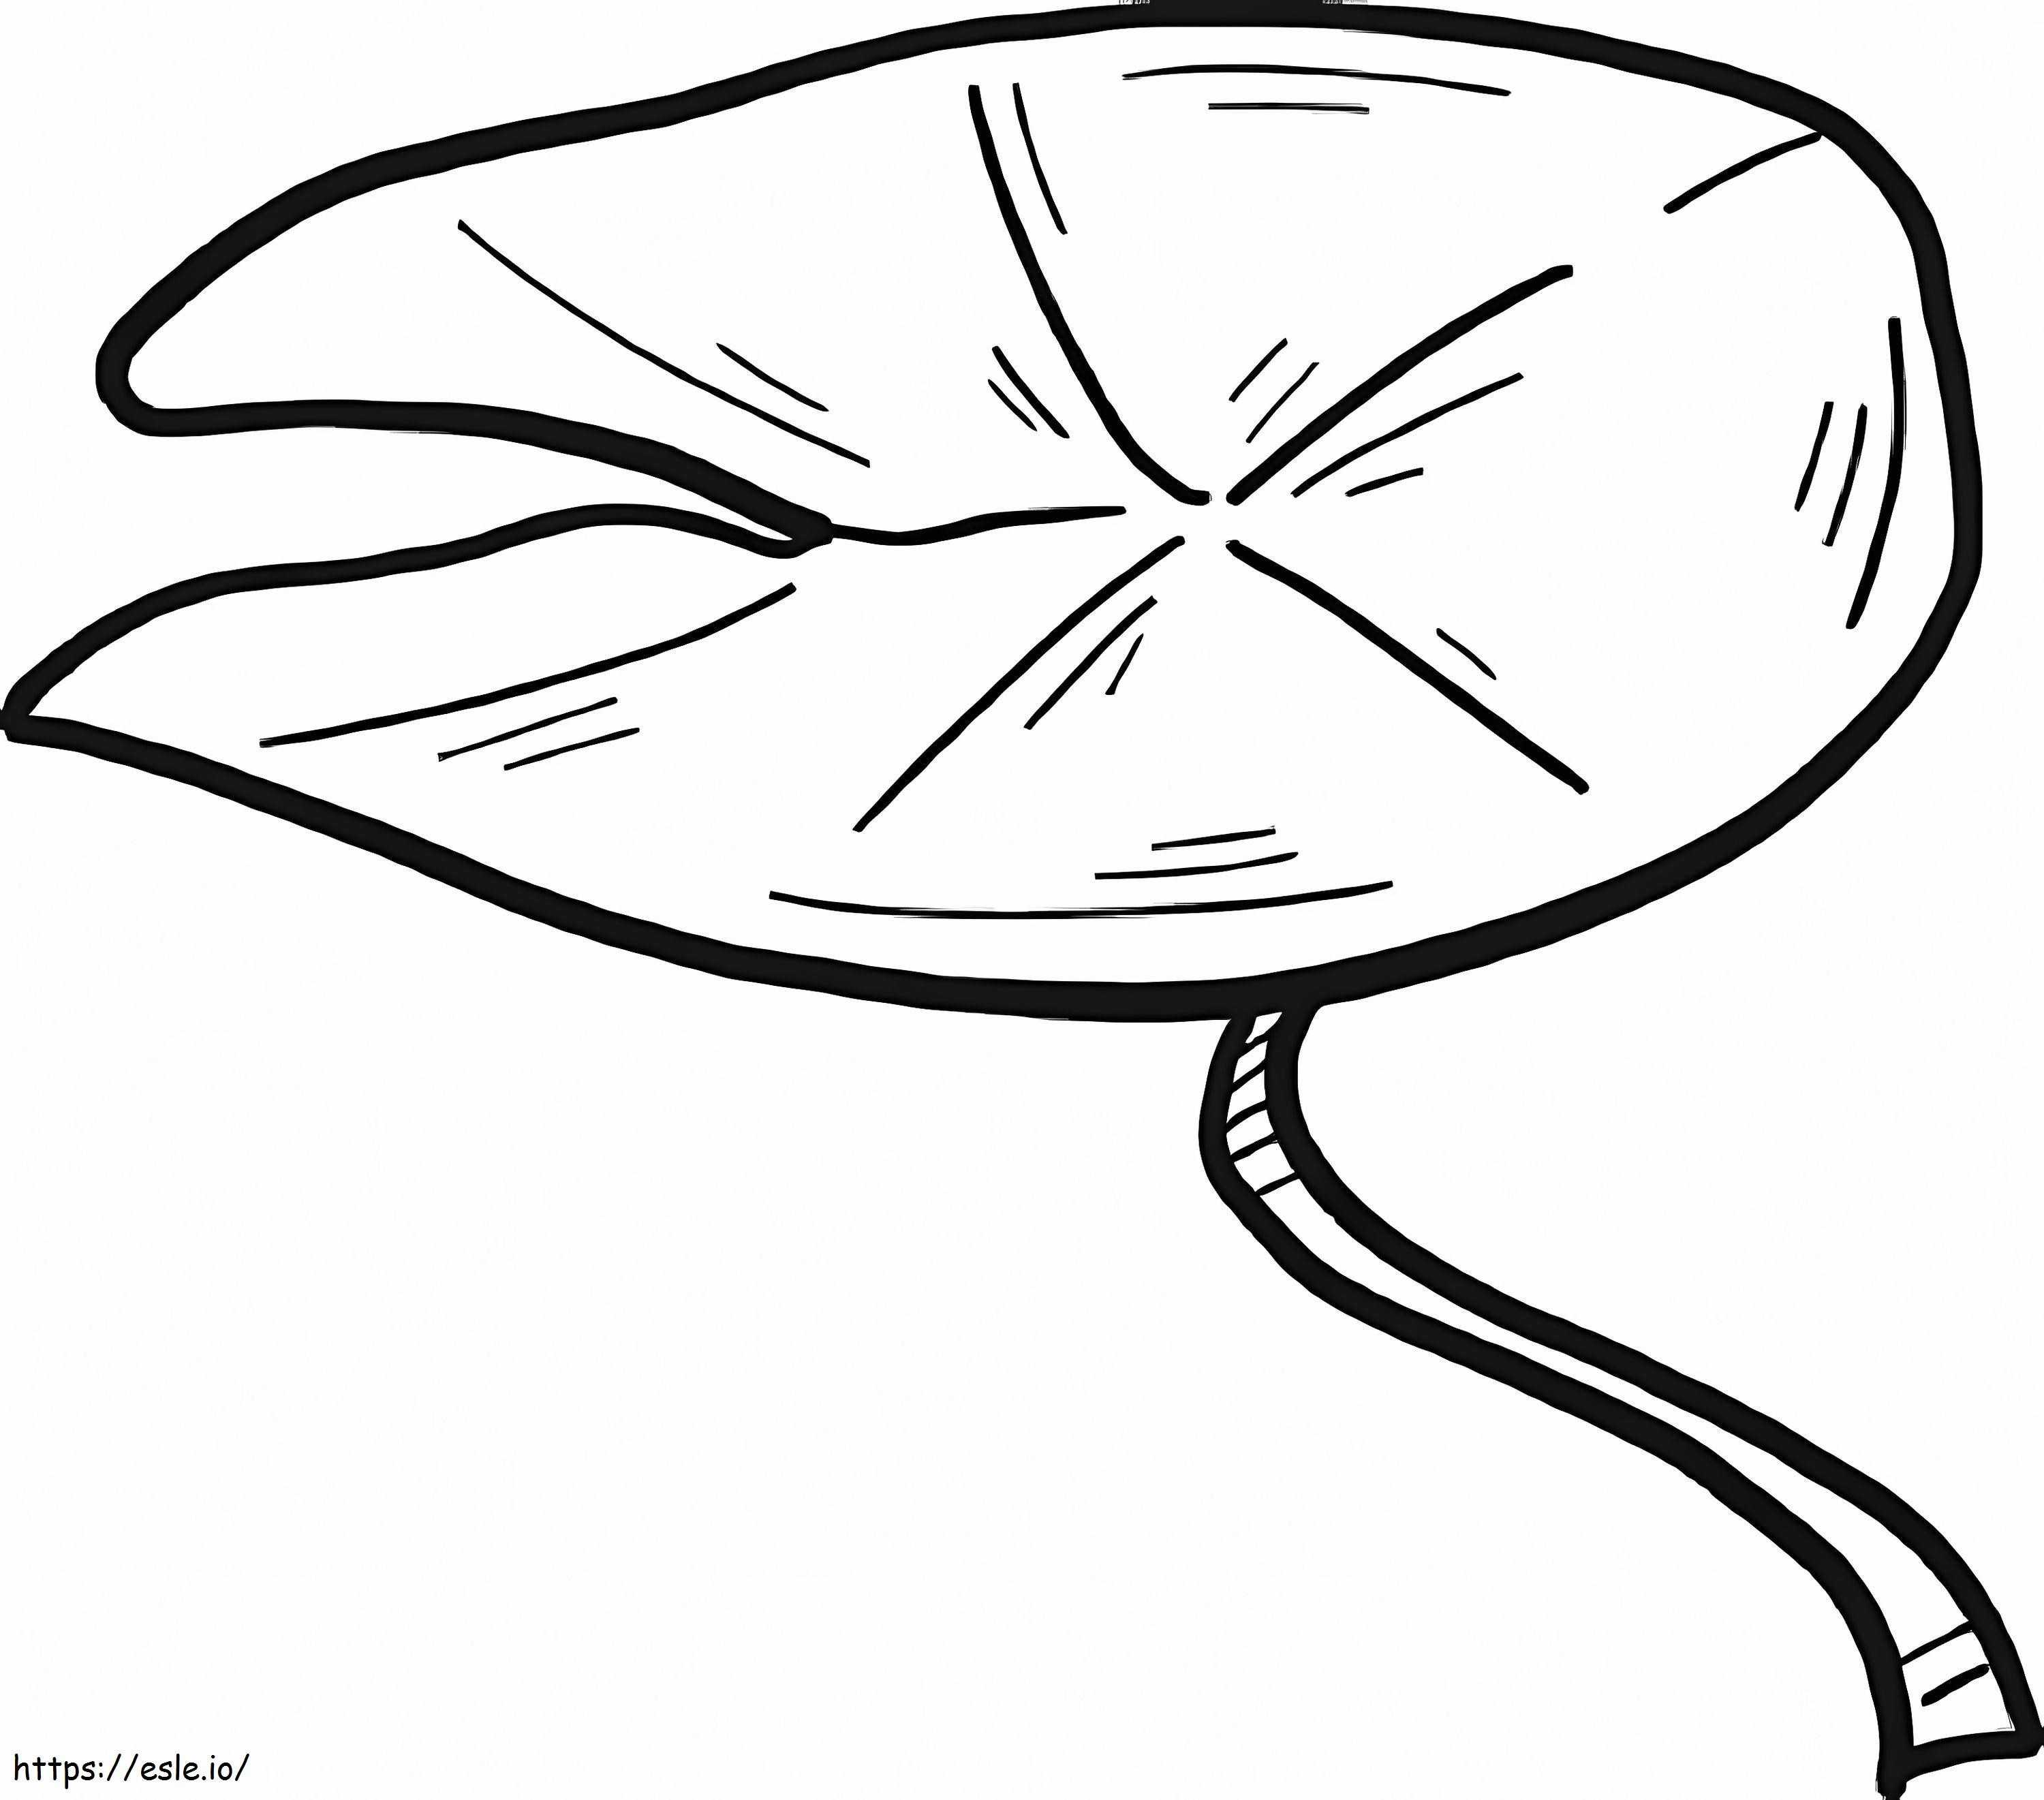 Normal Lily Pad coloring page